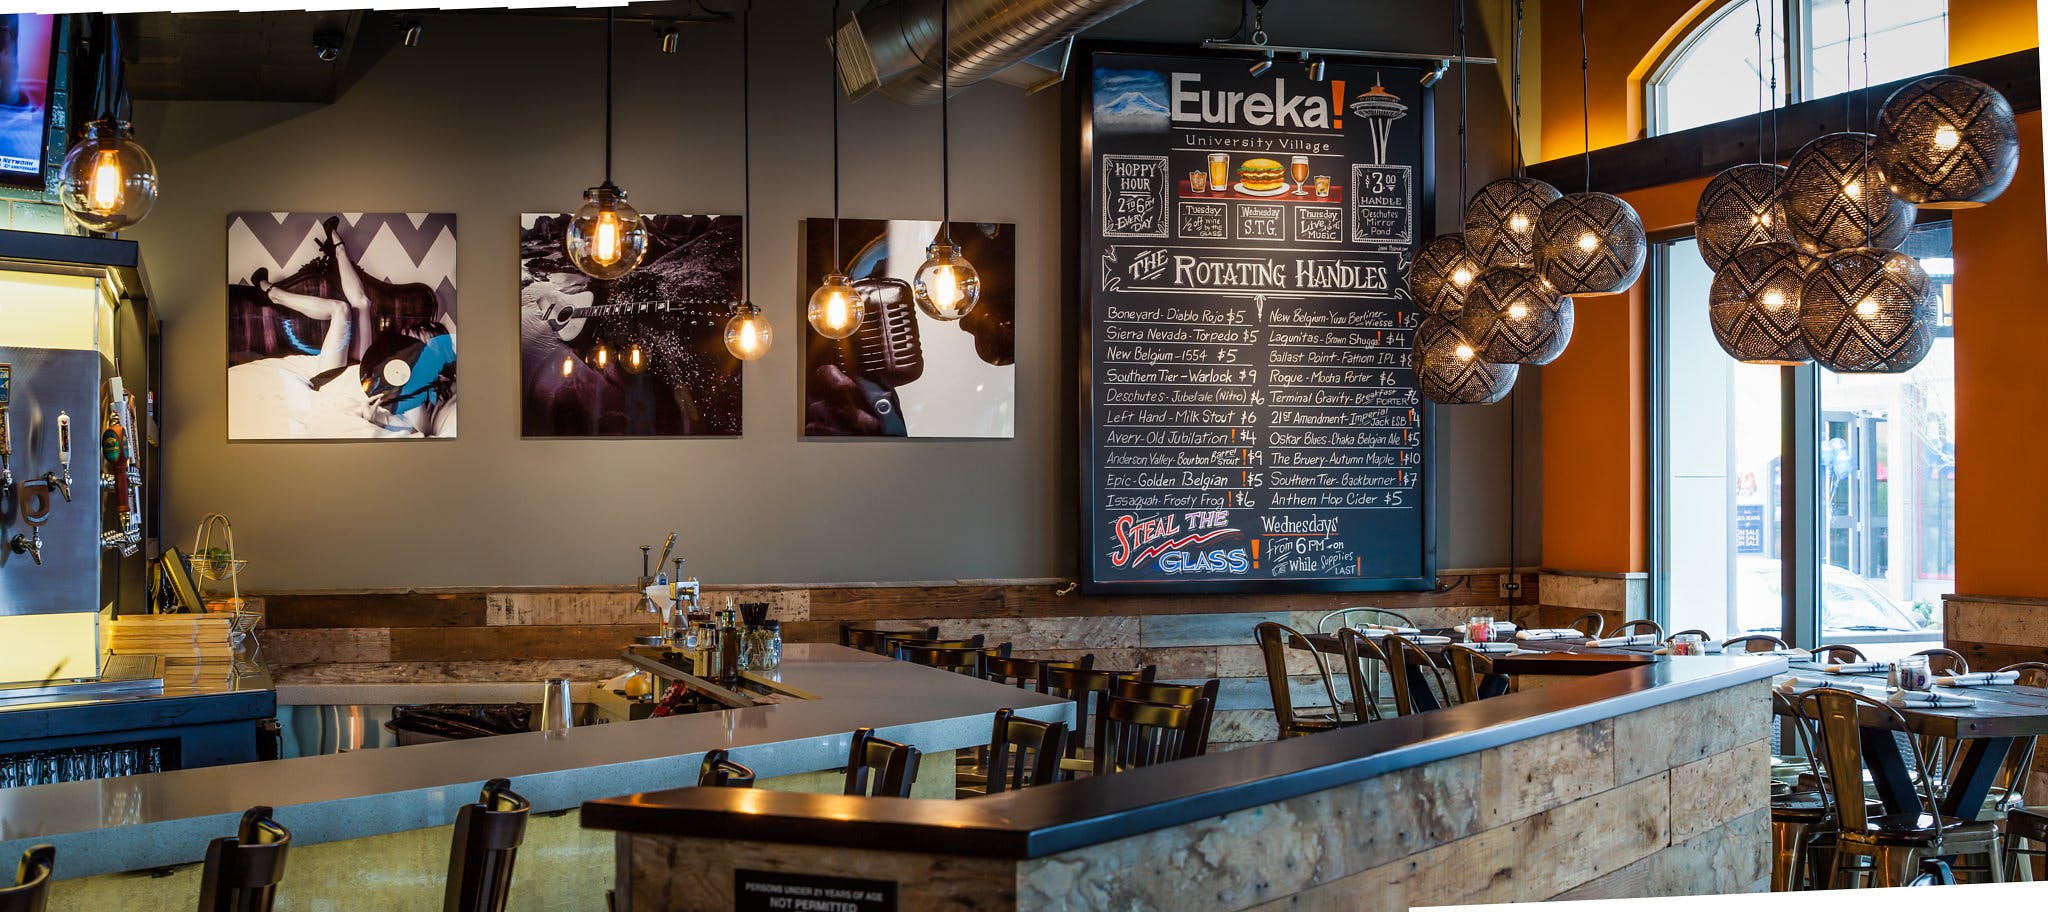 Dine, Drink and Relax at Eureka Restaurant at The Village